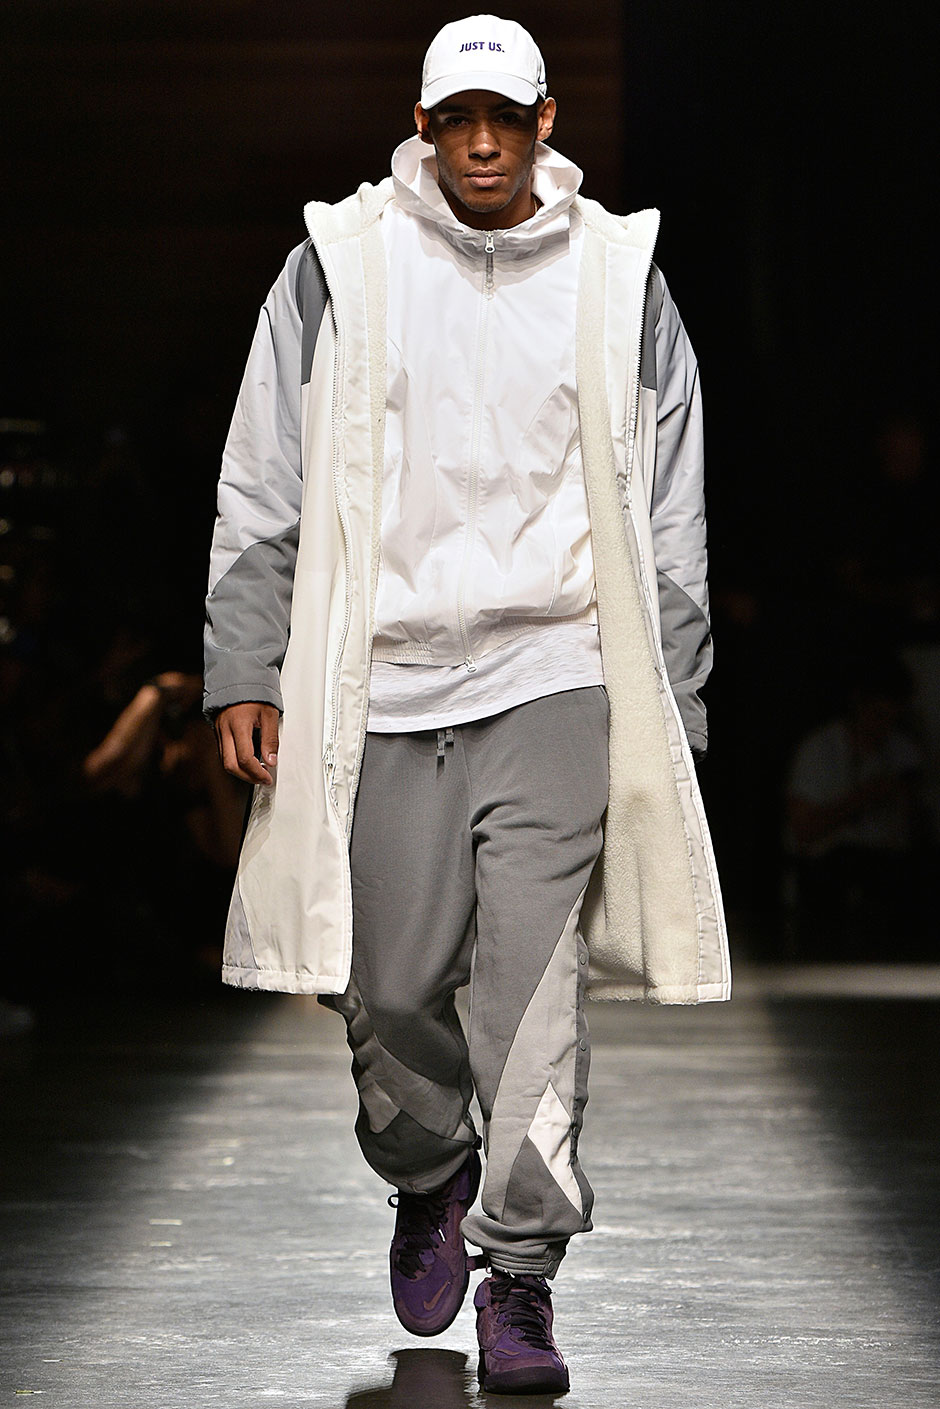 LeBron James And Scottie Pippen Walk The KITH Runway At NYFW ...